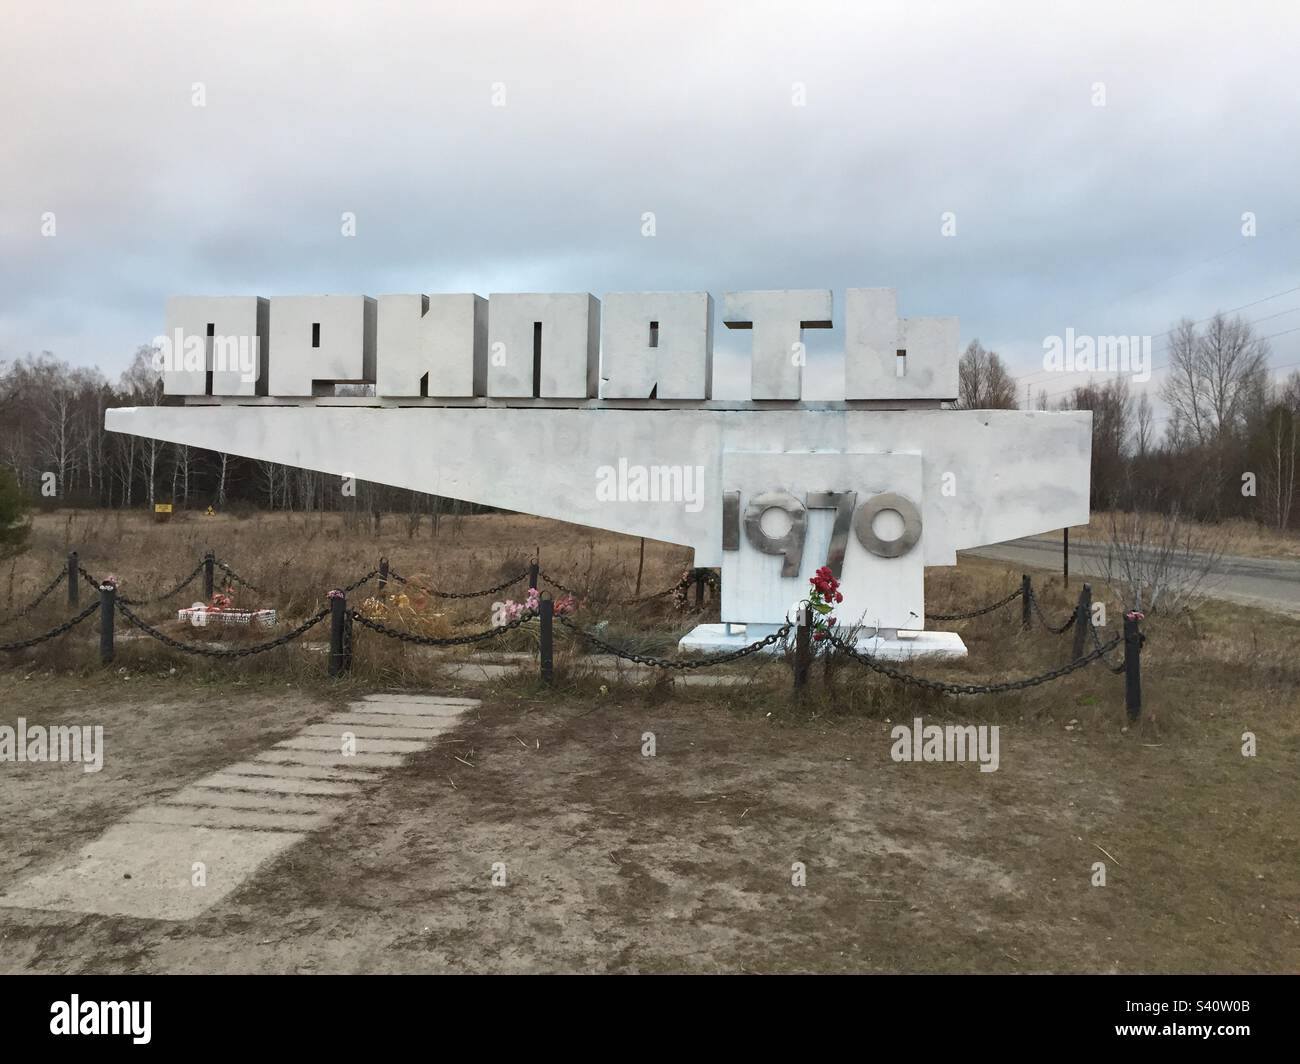 Pripyat Town Sign, Near Chernobyl, in the Nuclear Disaster Exclusion Zone, Kiev Oblast, Ukraine, January 2020. Stock Photo